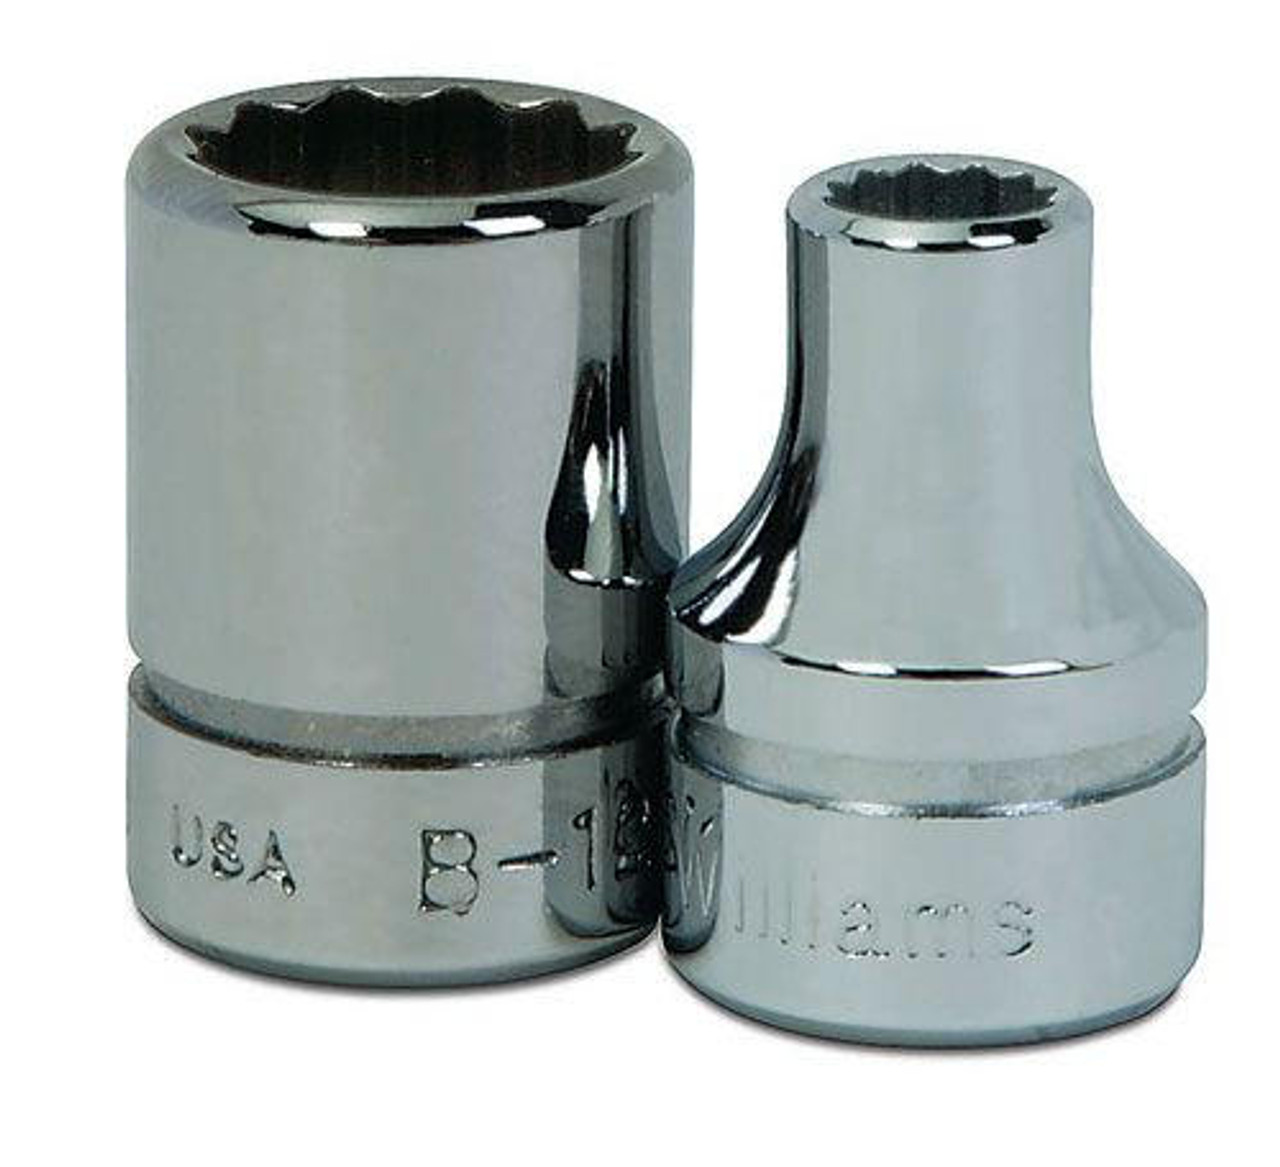 Williams Made In USA 13MM Williams 3/8" Dr Shallow Socket 12 Pt - BM-1213 